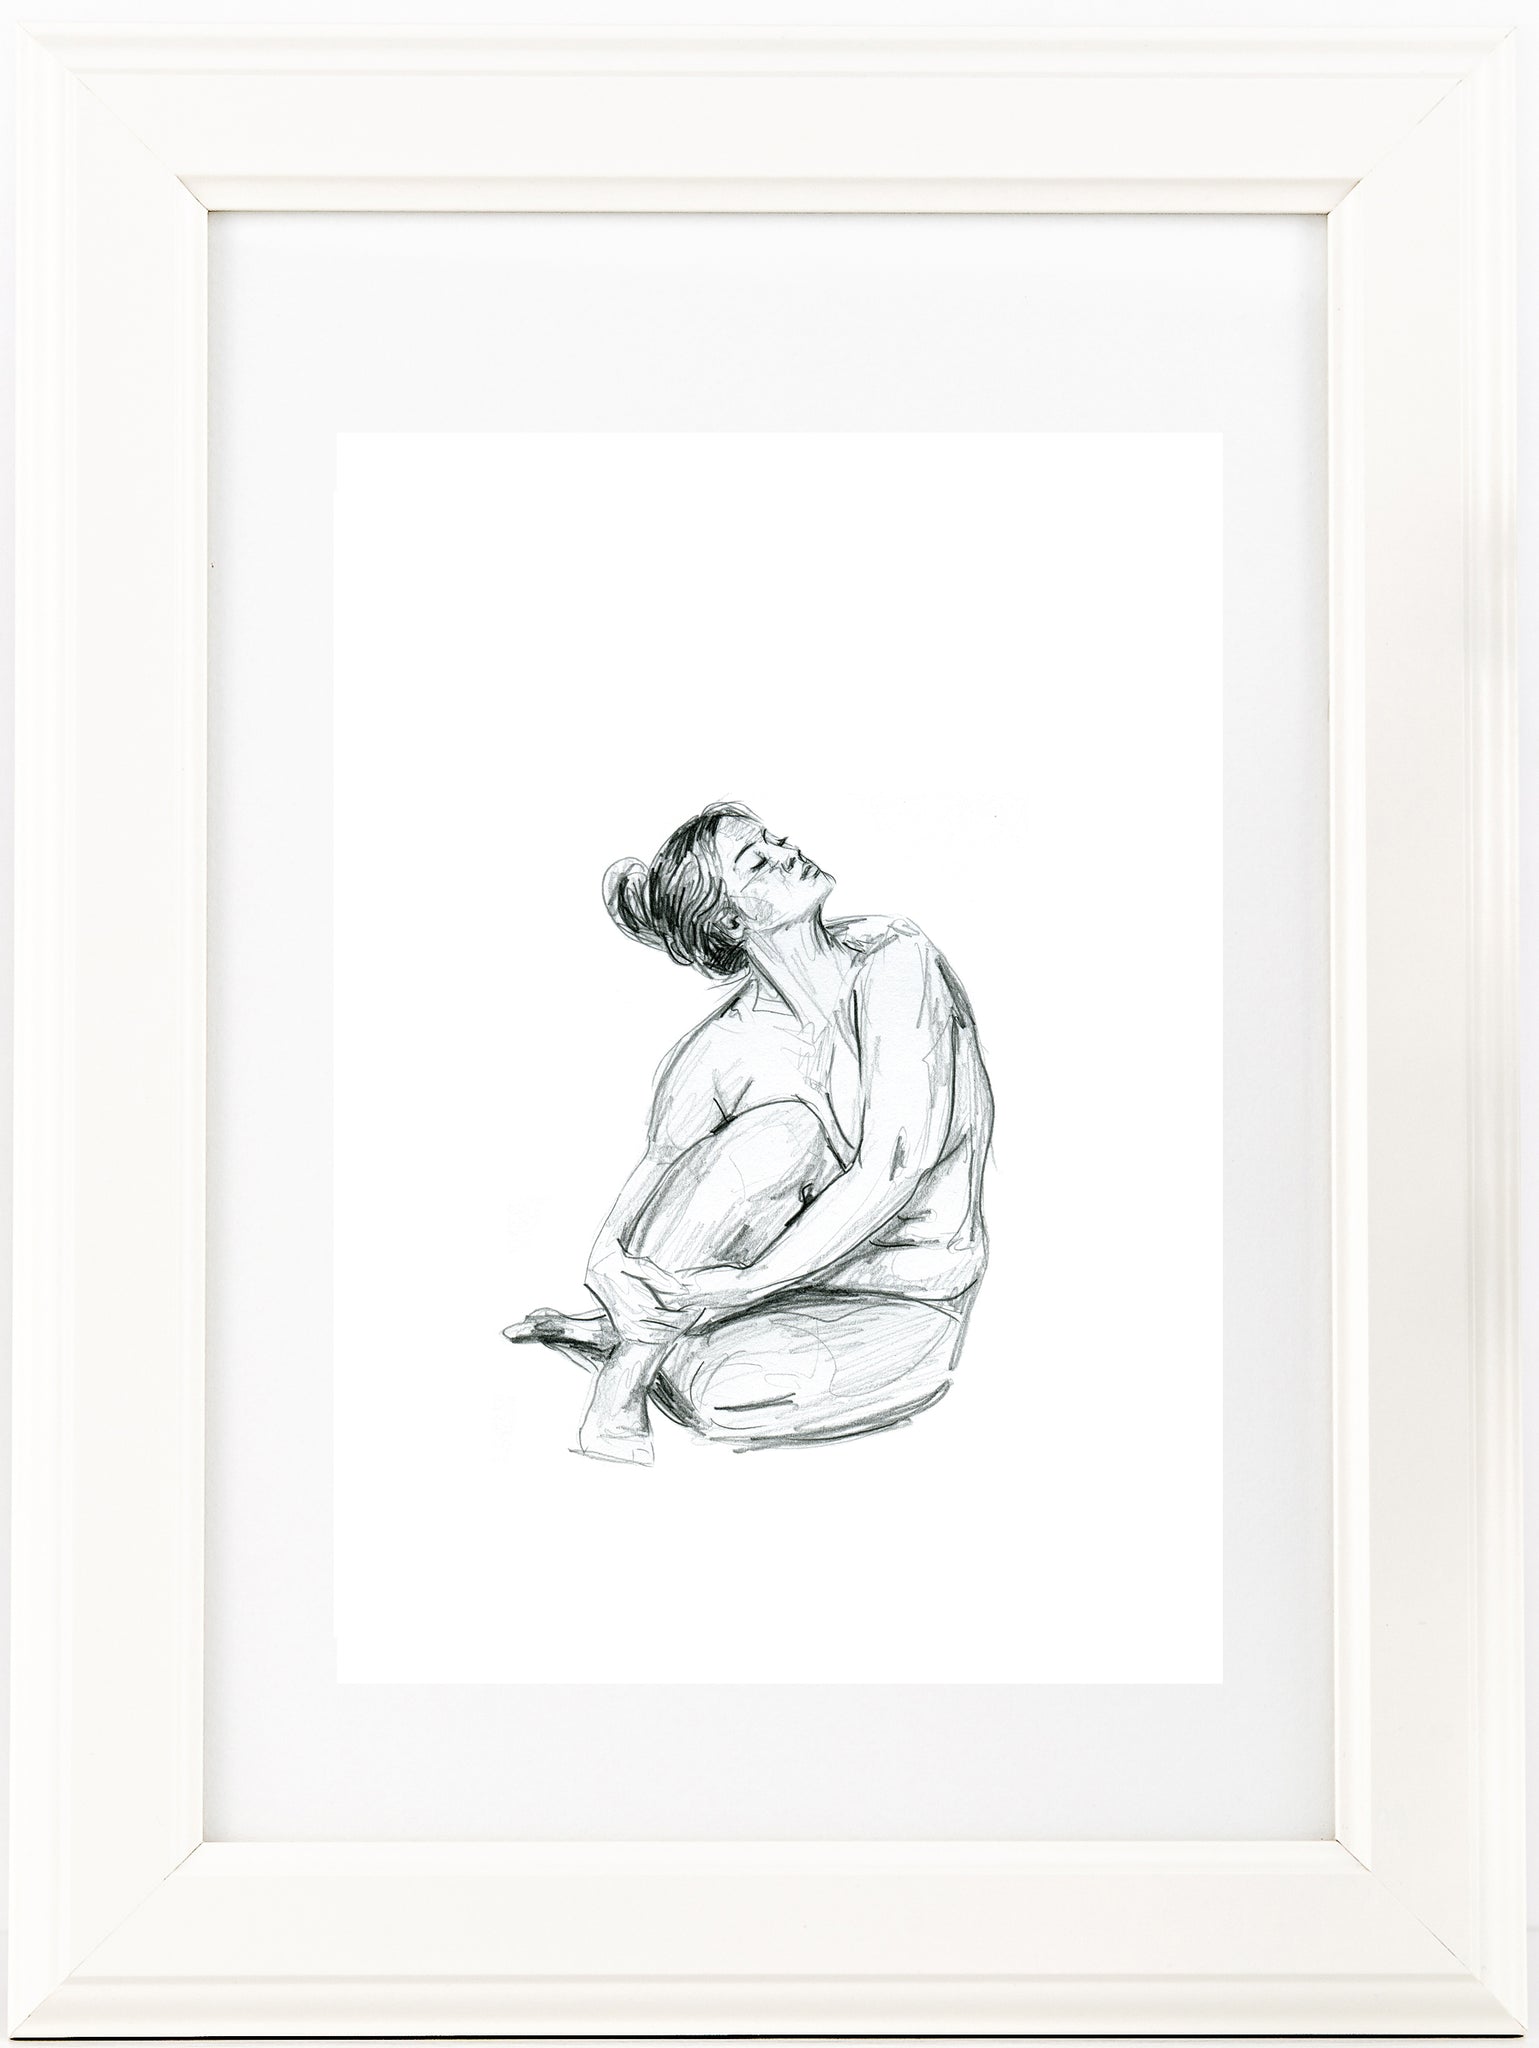 Hand drawn curvy nude female figure drawing print. Tasteful Black and White sketch. Unique Gift for her, boudoir, or country style